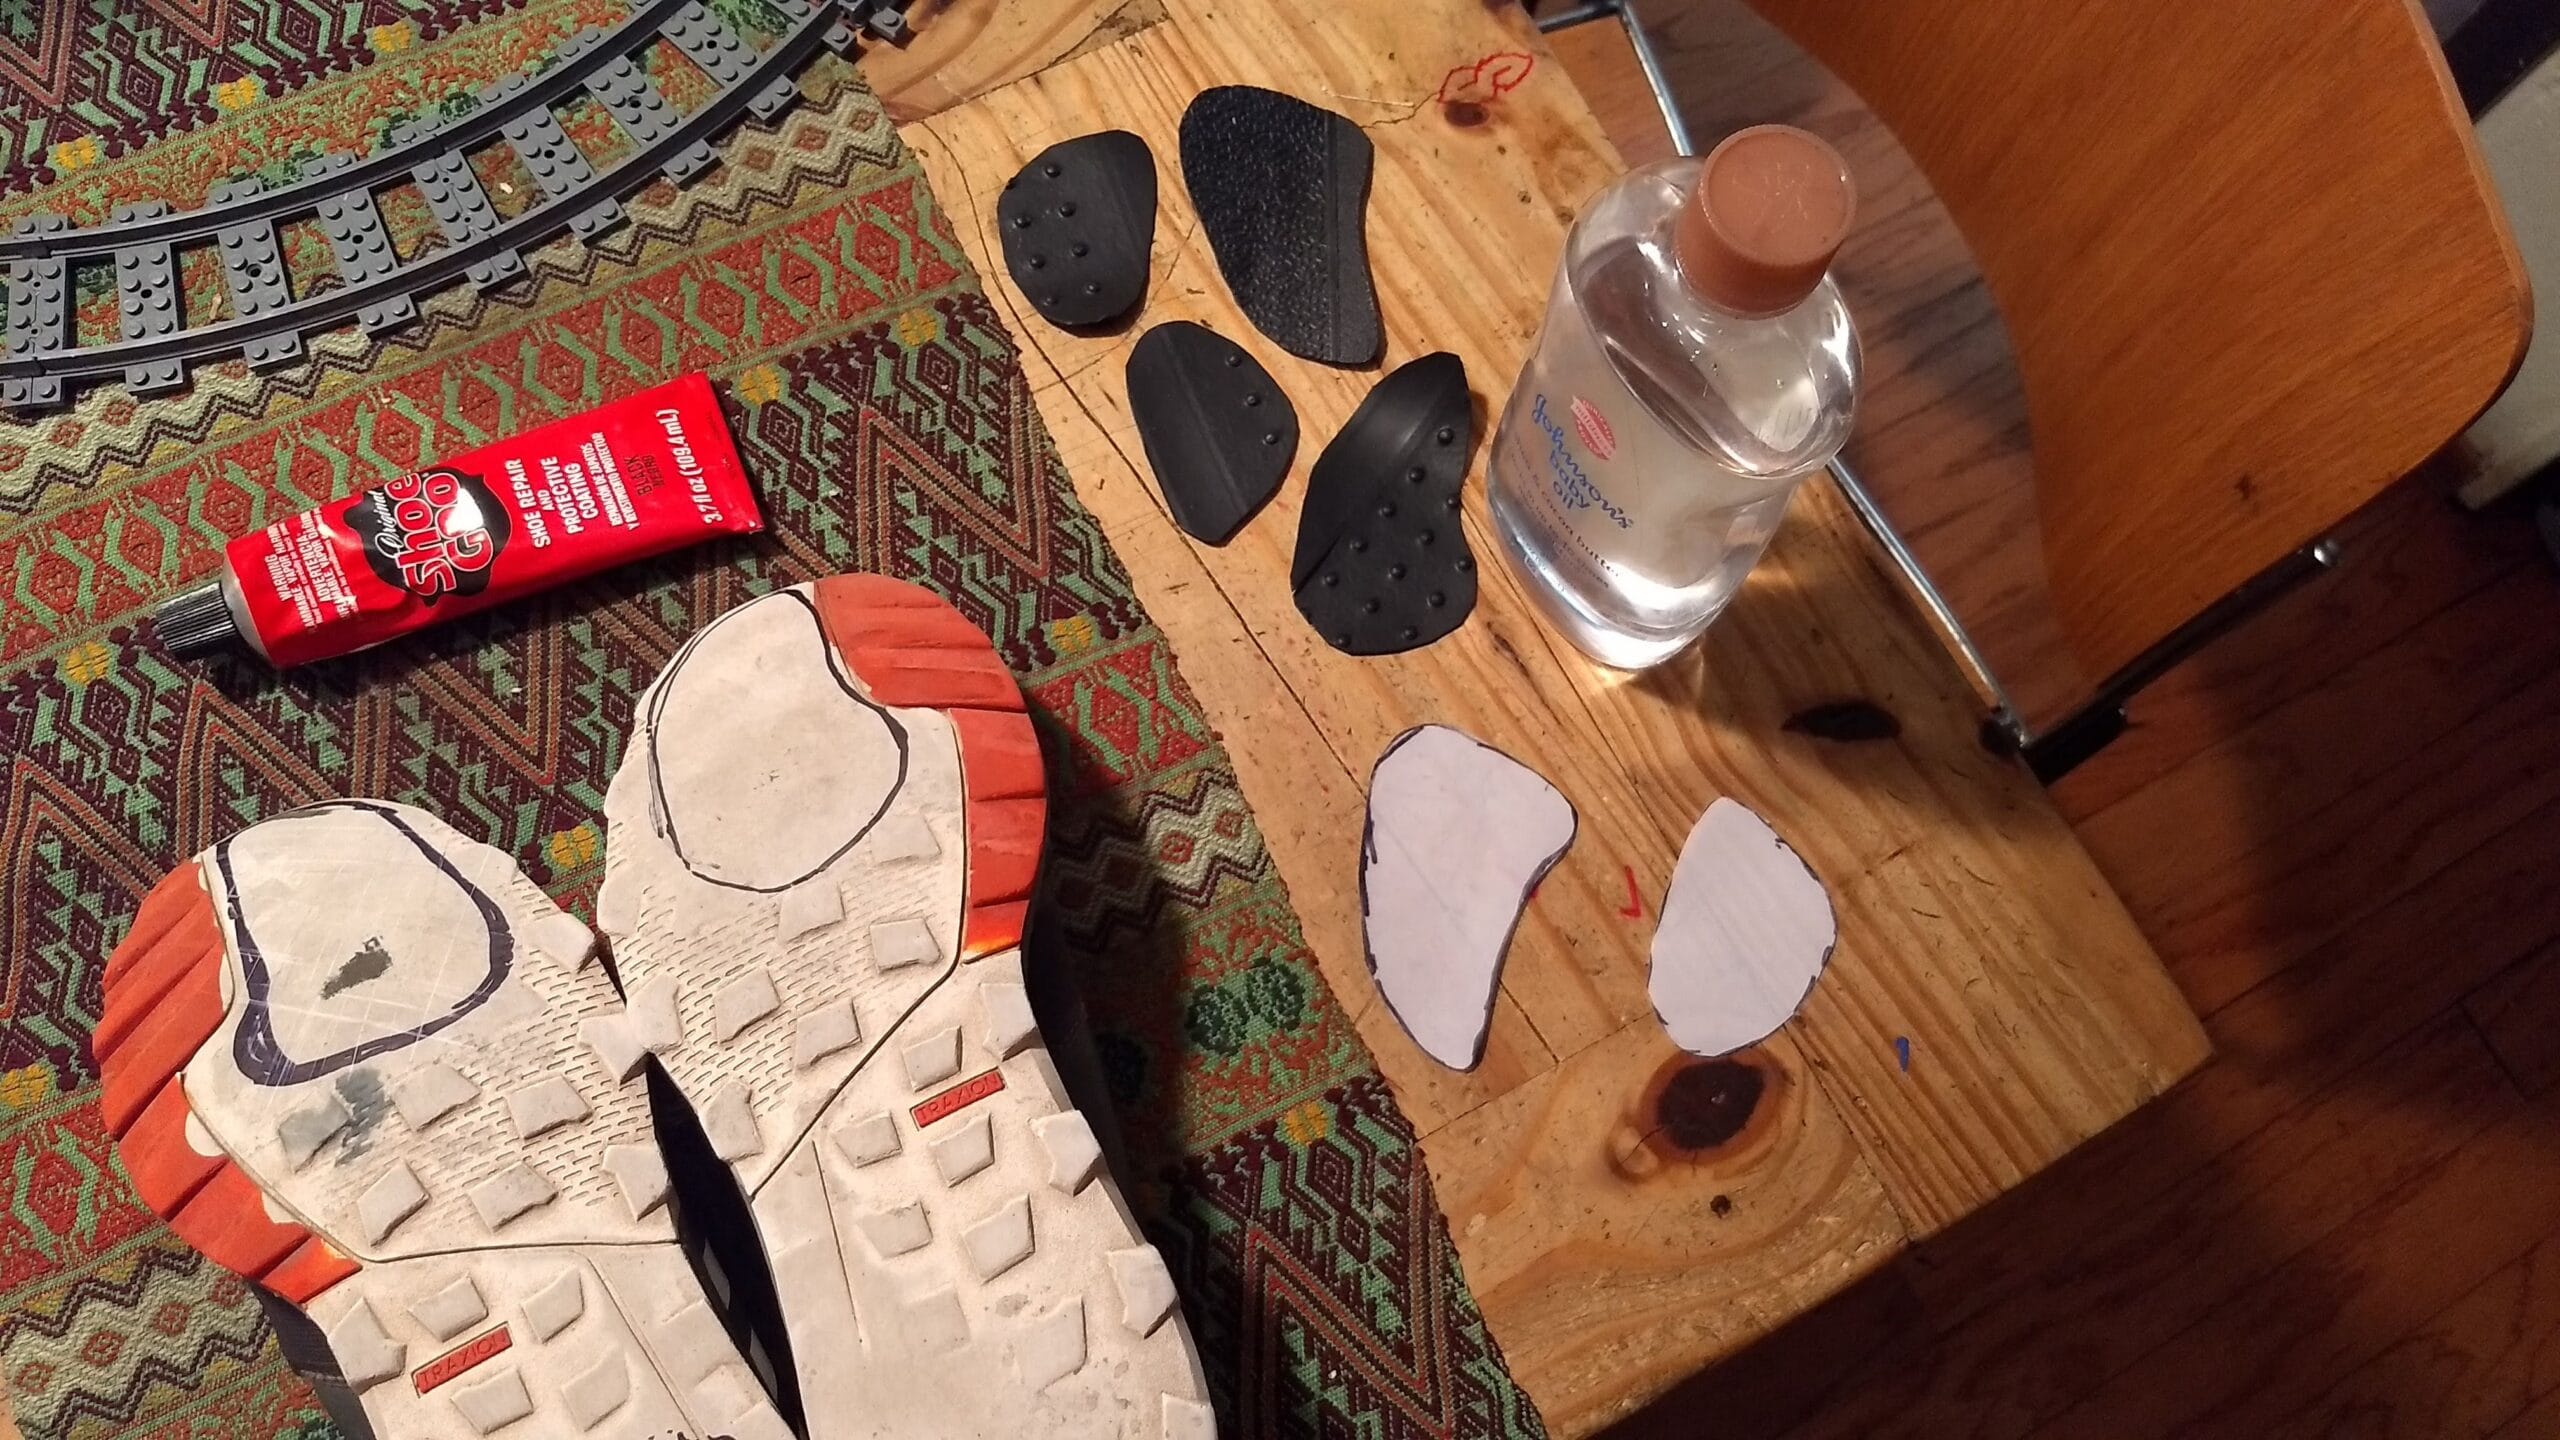 I’ve been partially resoling sneakers using old car mats, heel plates, and Shoe Goo. Make sure you have a ventilated space or a mask when using Shoe Goo! Credit: Neal Gorenflo. 